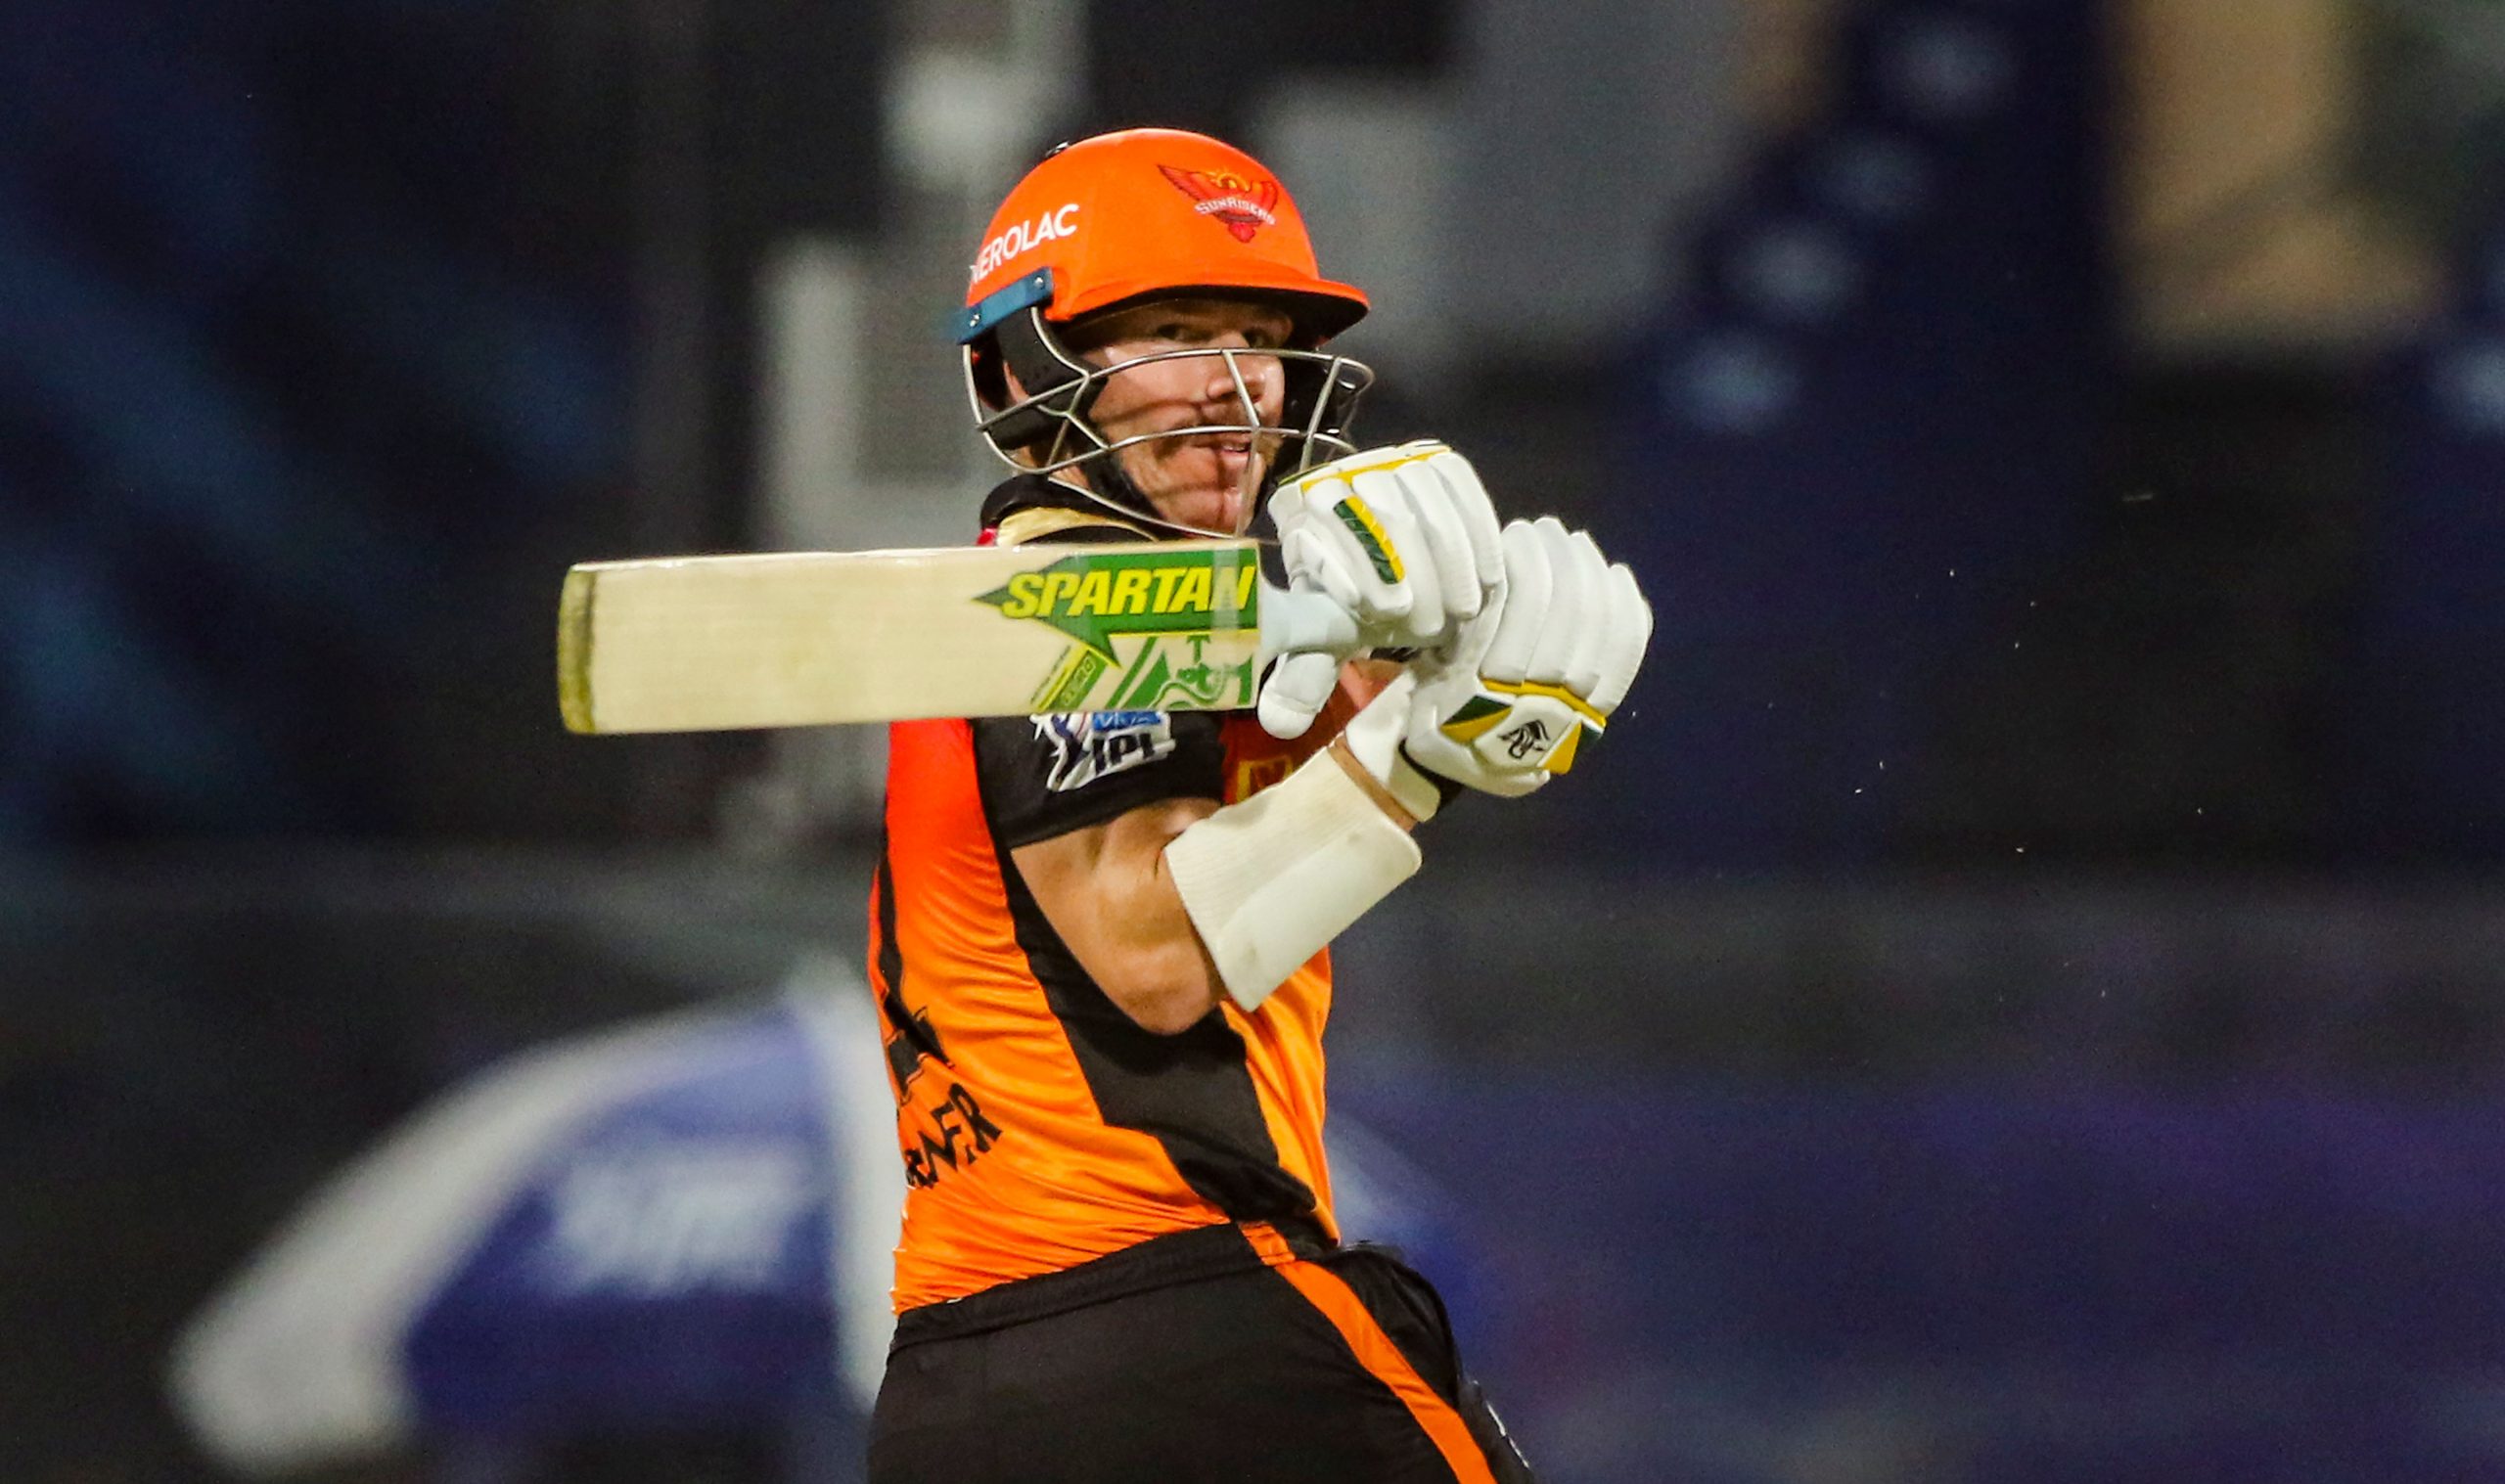 IPL 2021: Warner, Pandey pay the price for poor form as SRH axe seniors